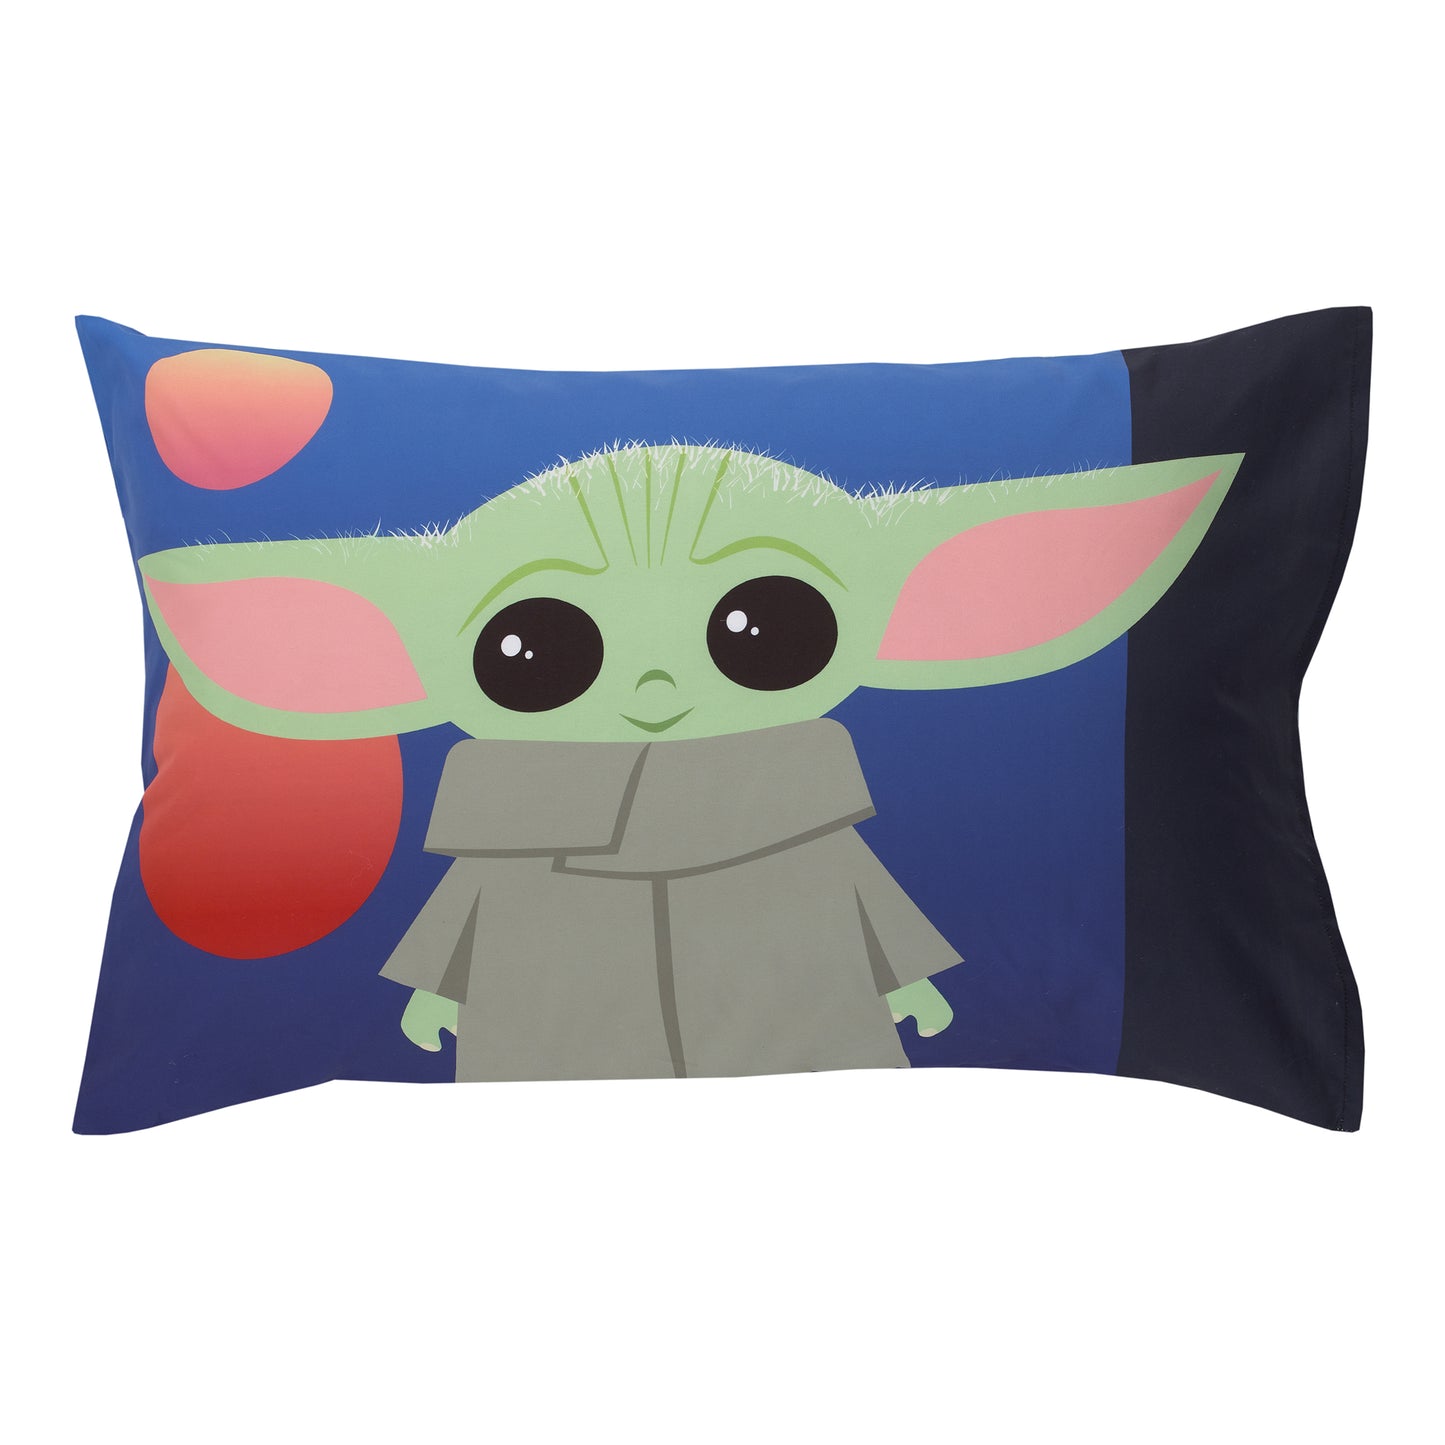 Star Wars The Mandalorian and The Child Grogu Blue, and Yellow, and Orange Din Djarin Twin Suns 4 Piece Toddler Bed Set - Comforter, Fitted Bottom Sheet, Flat Top Sheet, and Reversible Pillowcase